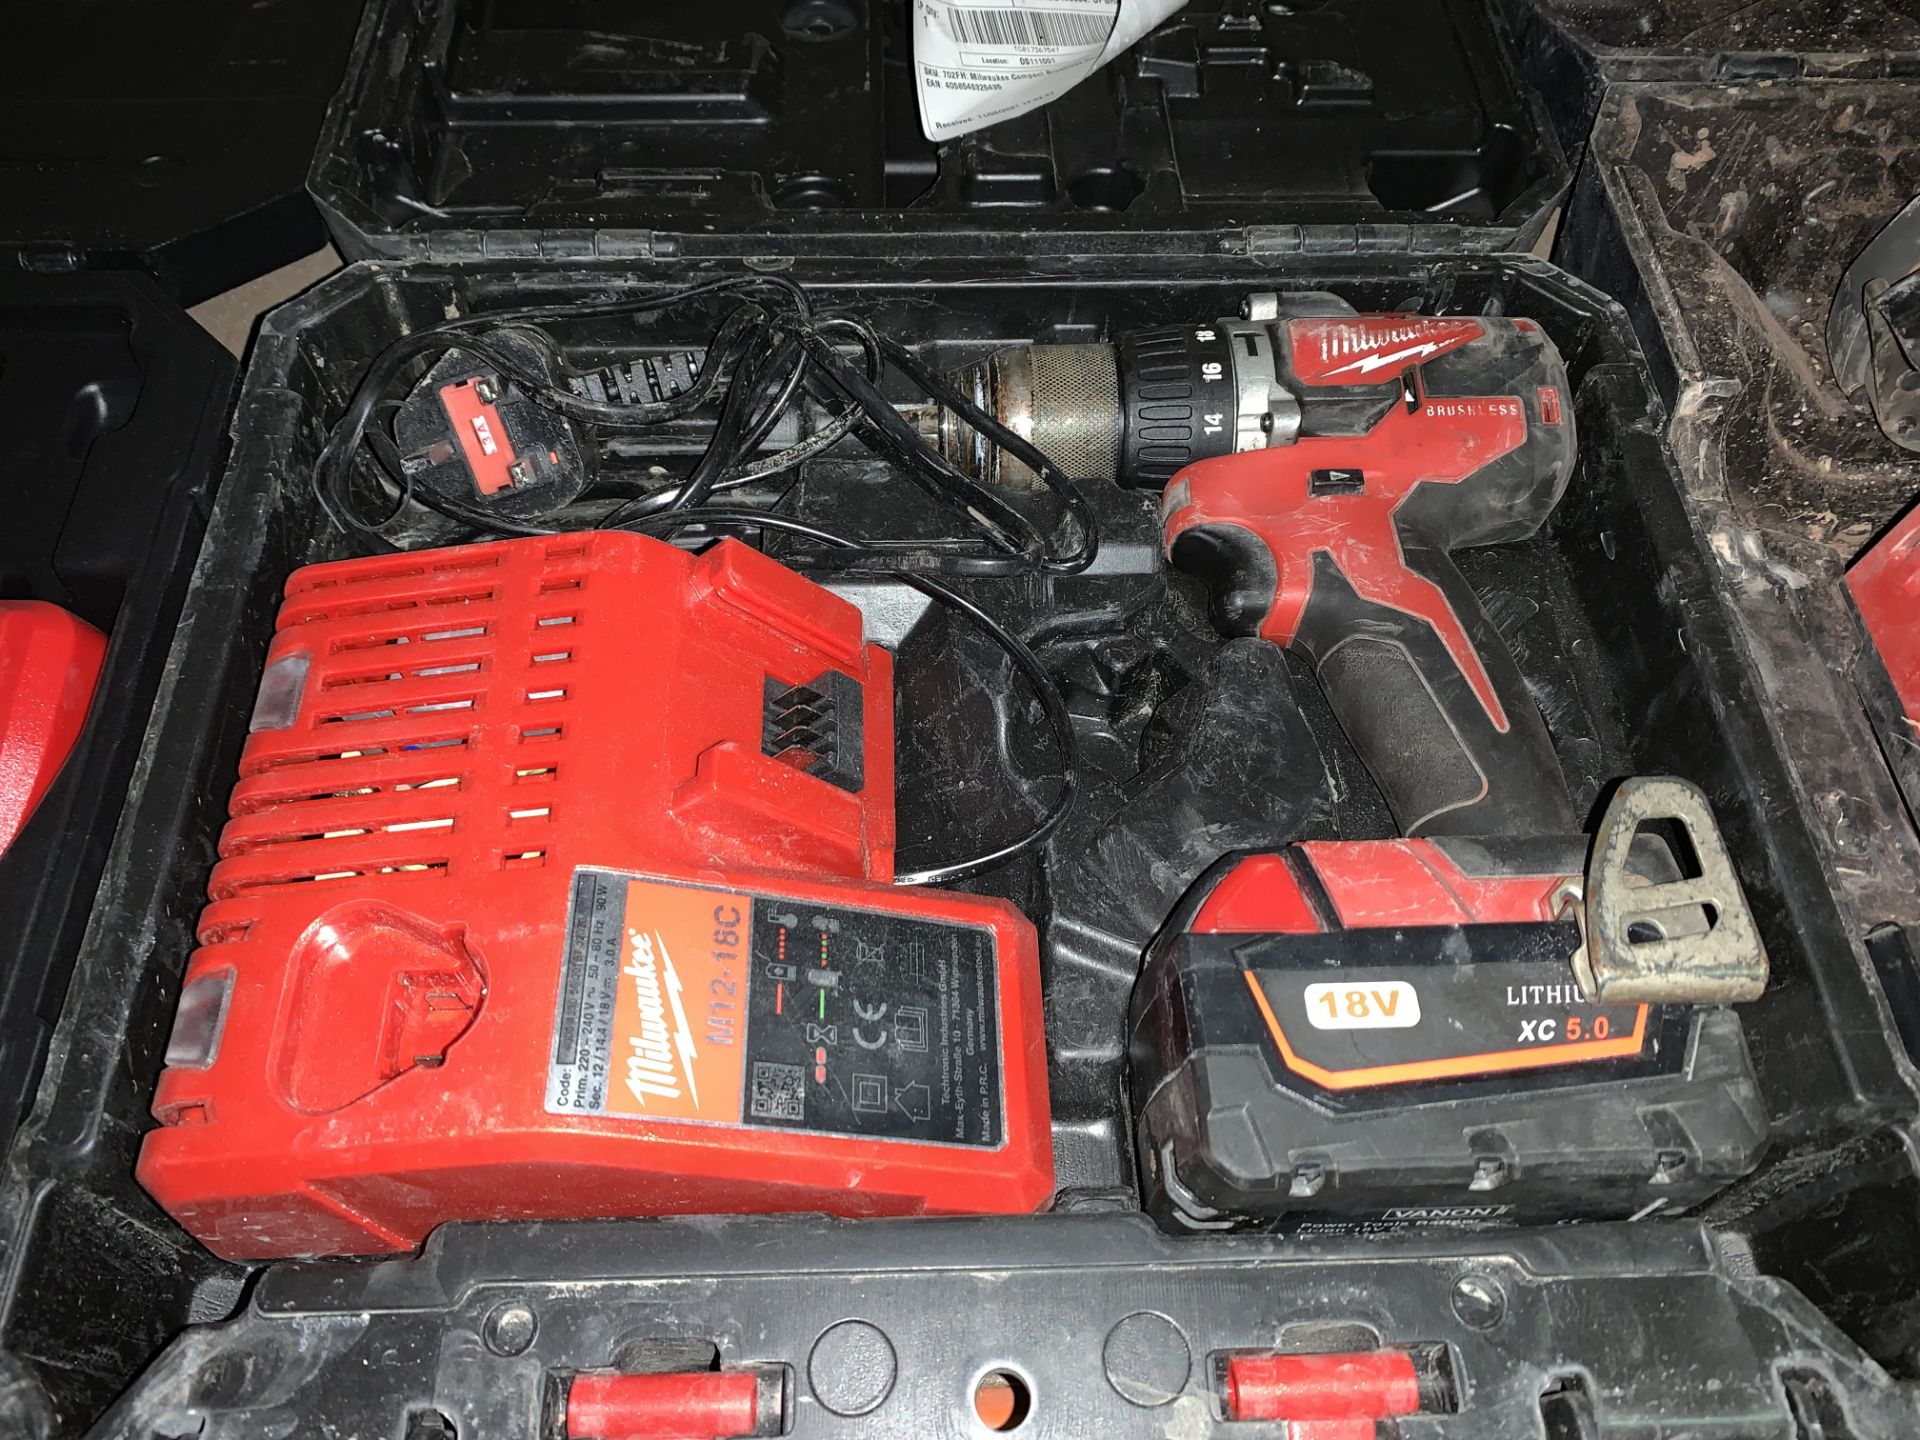 MILWAUKEE M18 CBLPD-402C 18V 4.0AH LI-ION REDLITHIUM BRUSHLESS CORDLESS COMBI DRILL COMES WITH 1